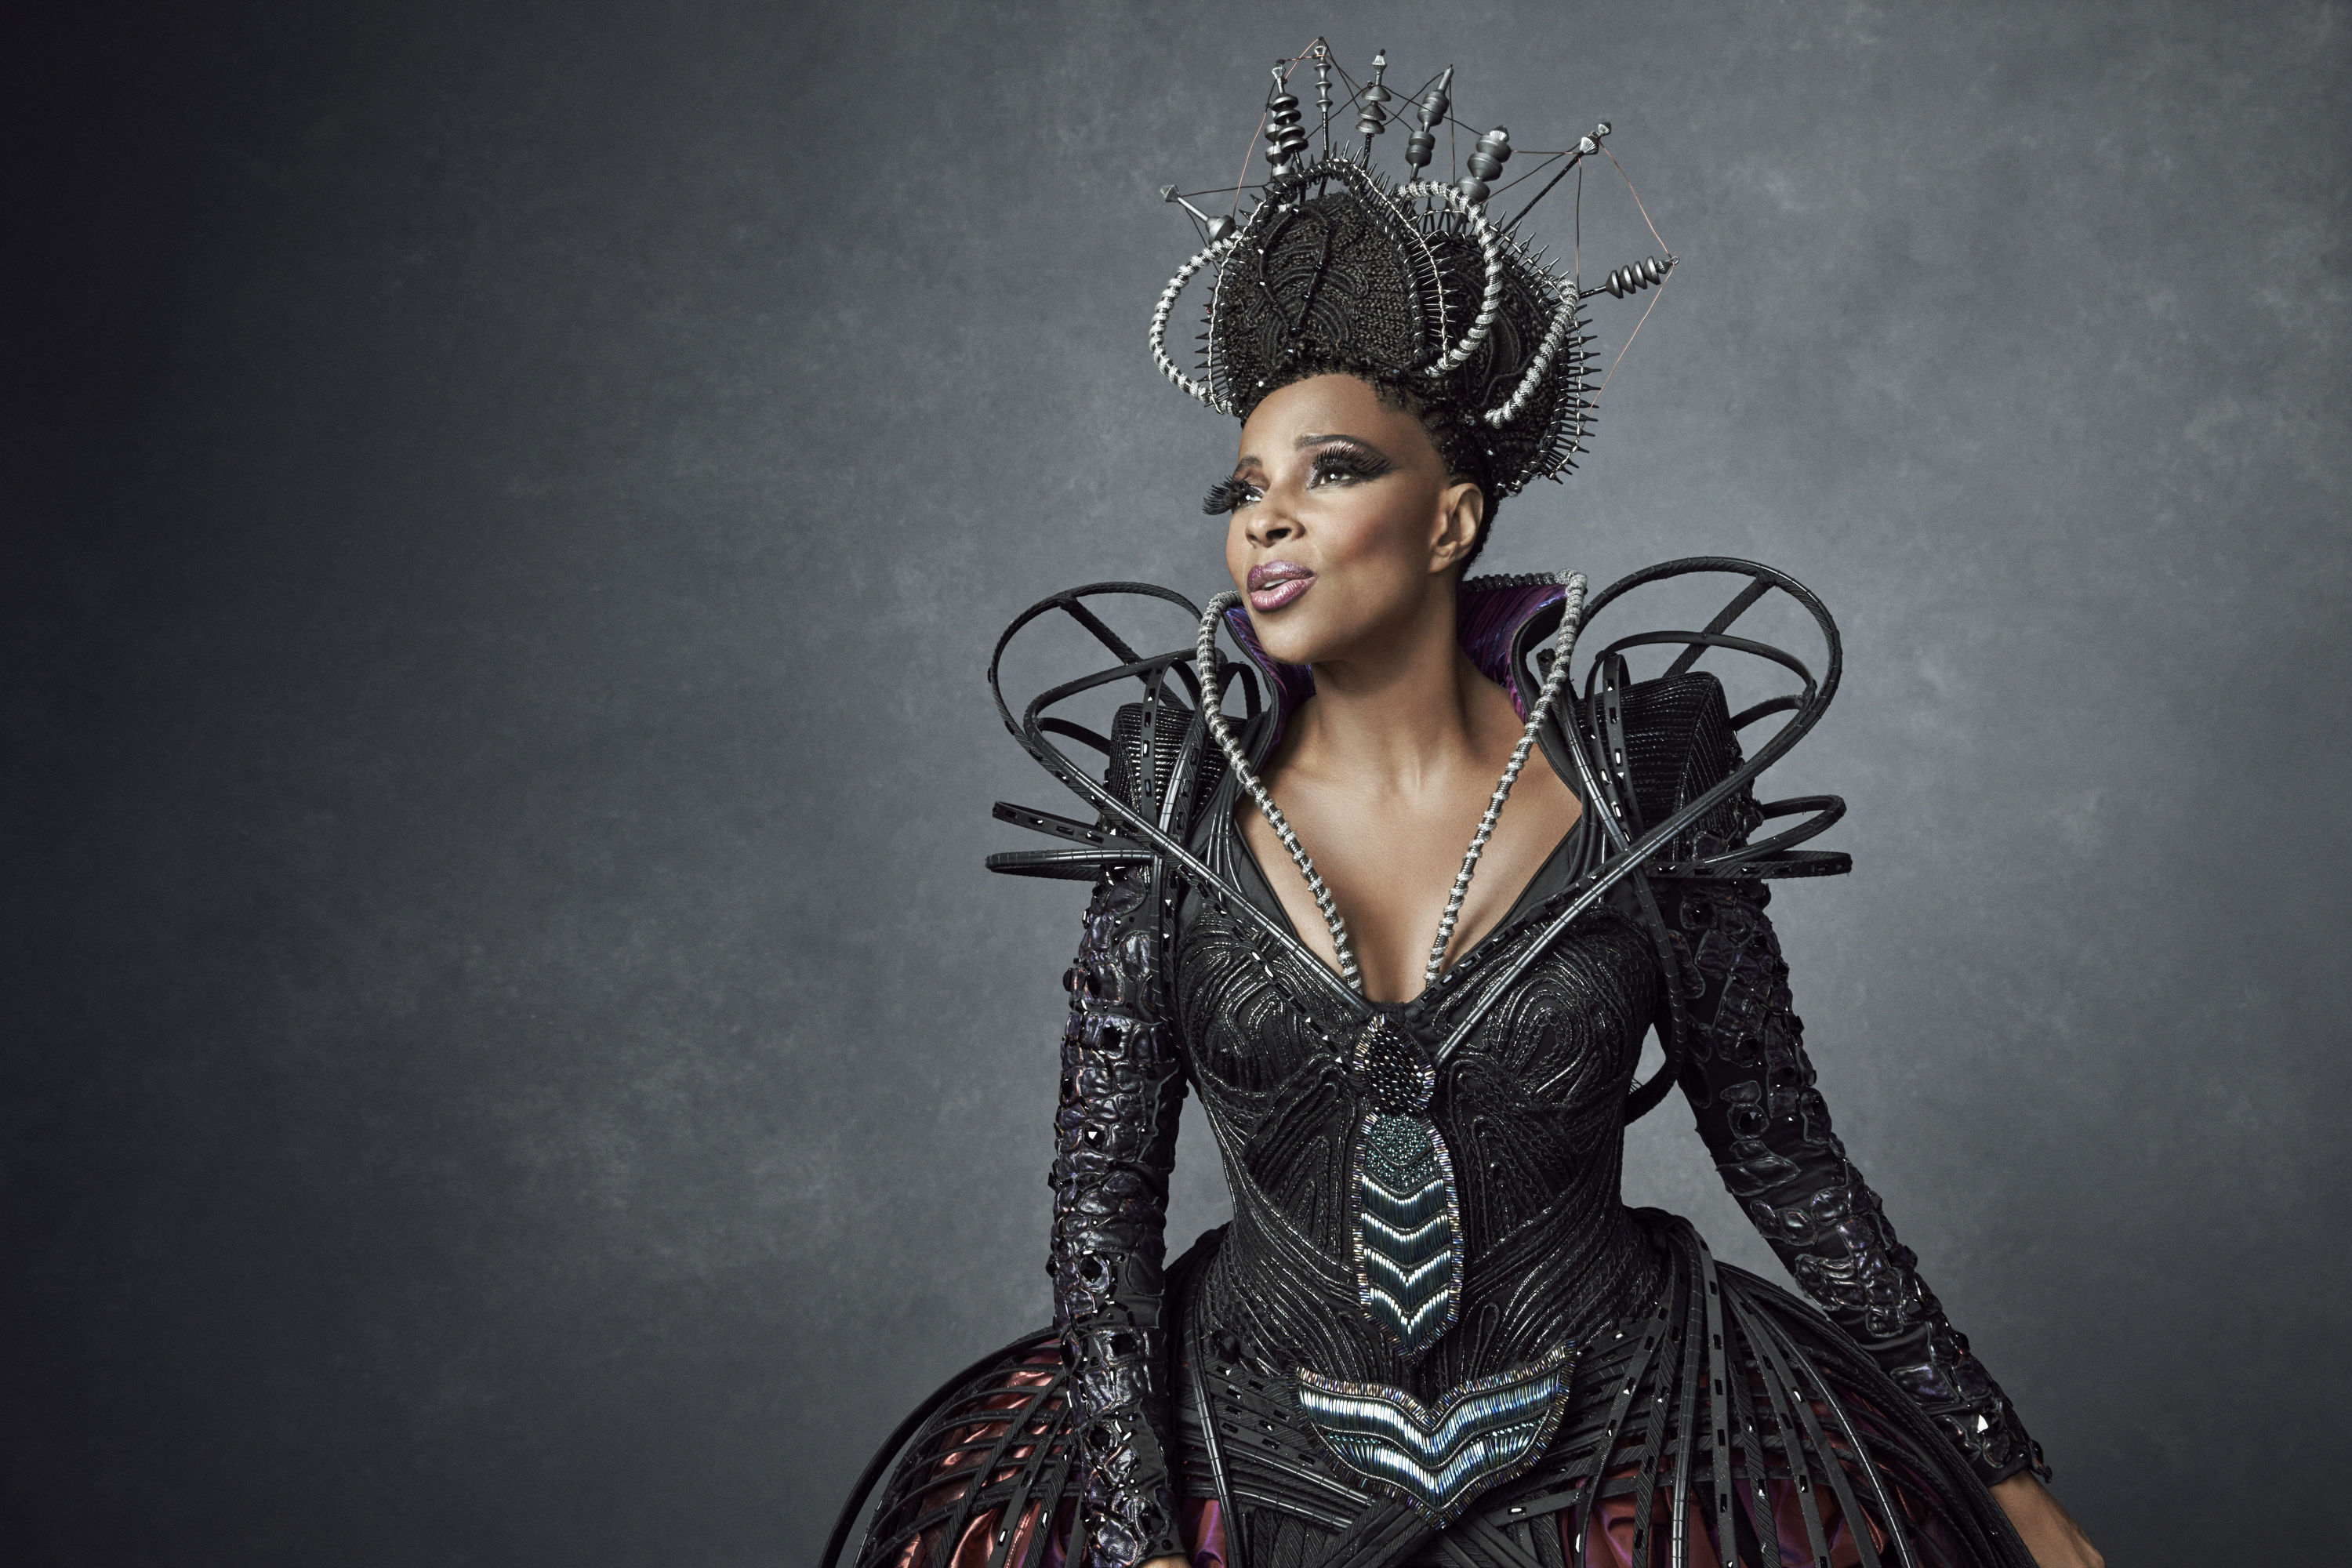 The-Wiz-Live-Mary-J.-Blige-as-Wicked-Witch-of-the-West-3.jpg